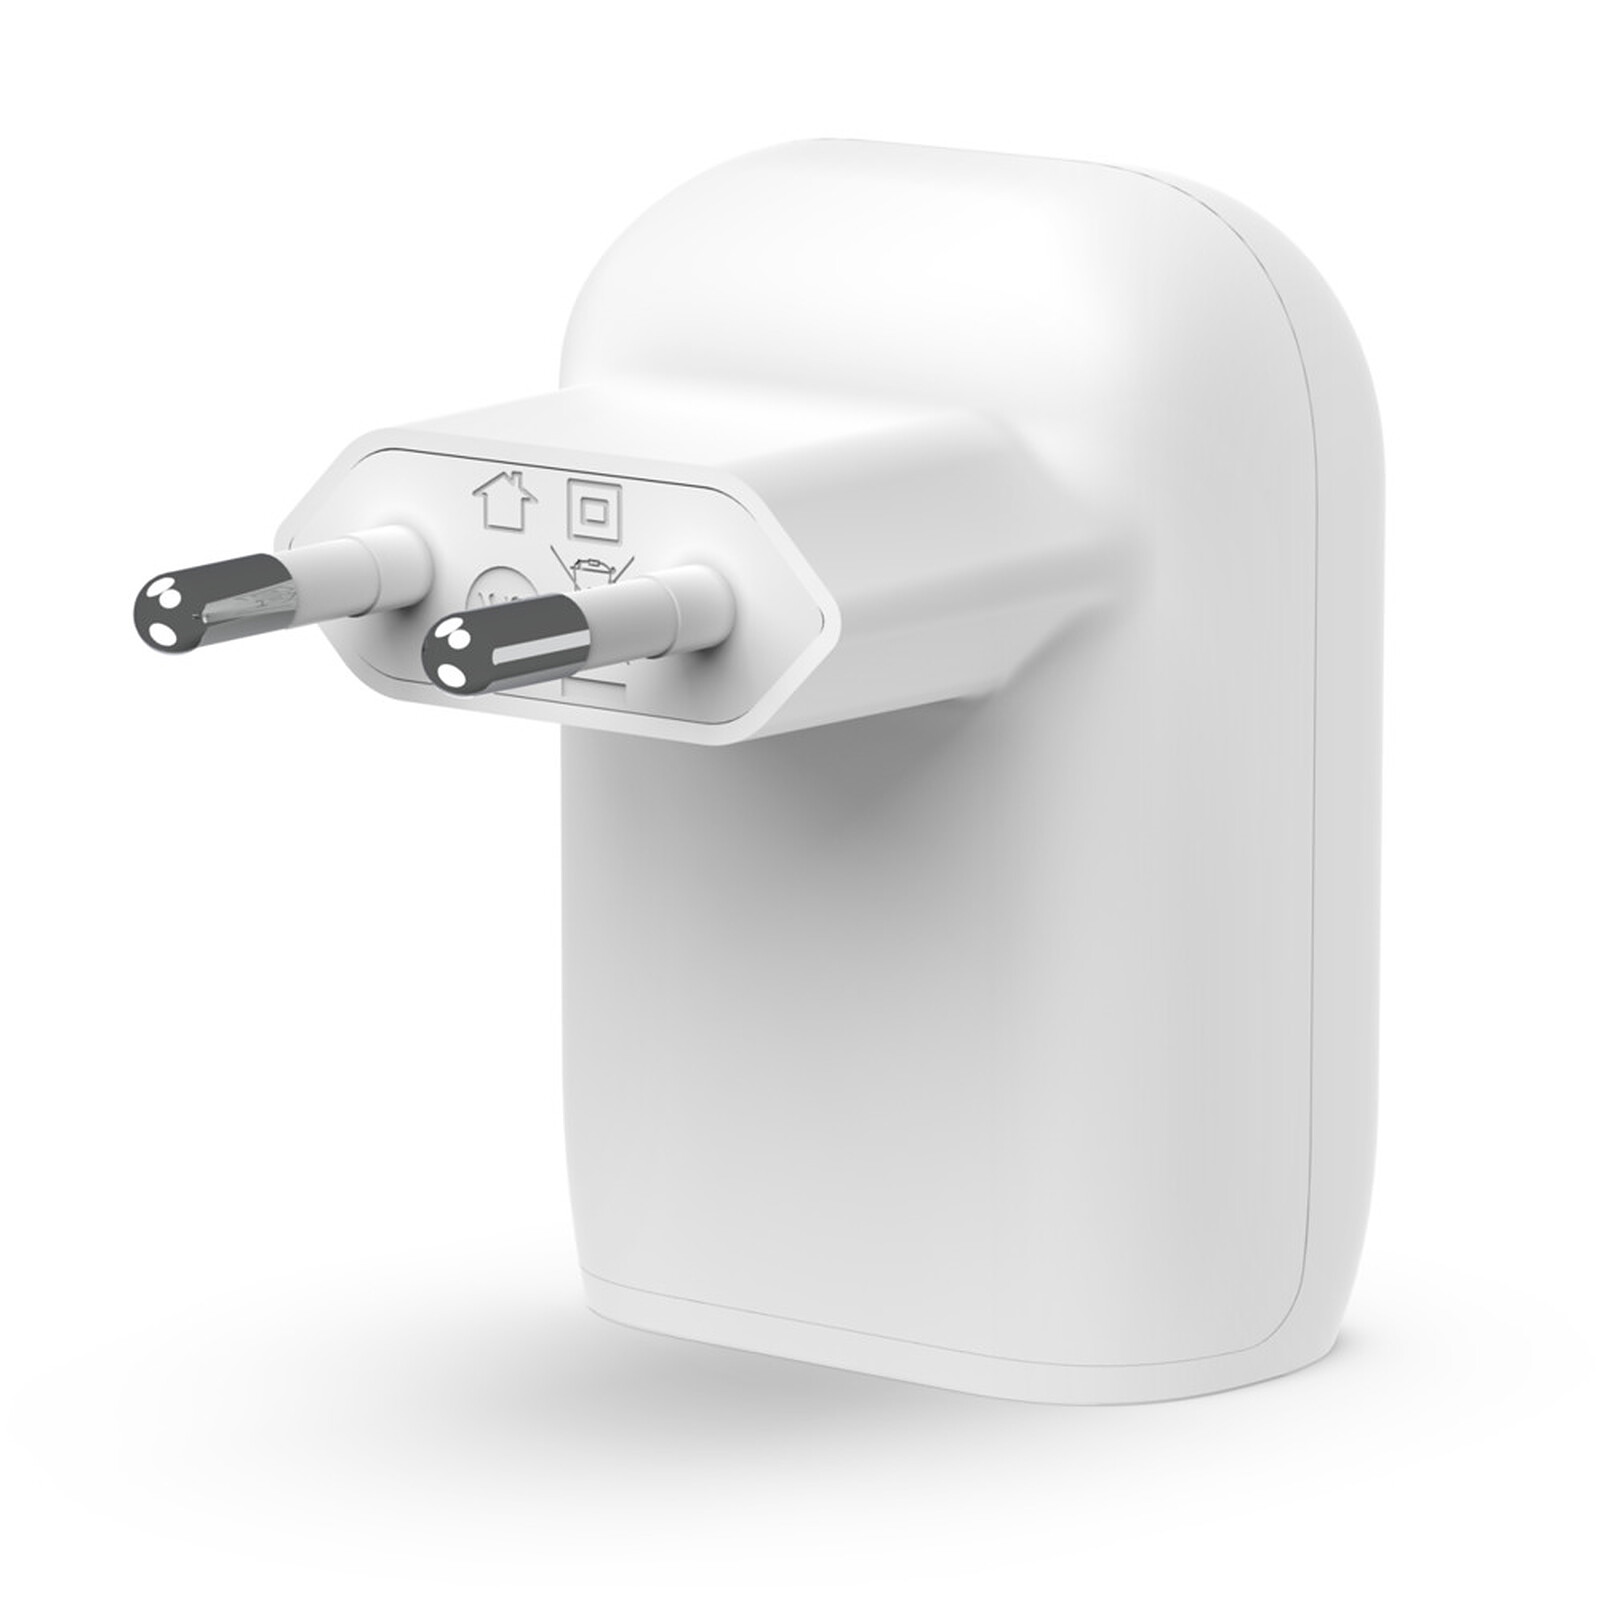 CHARGEUR SECTEUR USB TYPE-C 38W POWER DELIVERY - BLANC